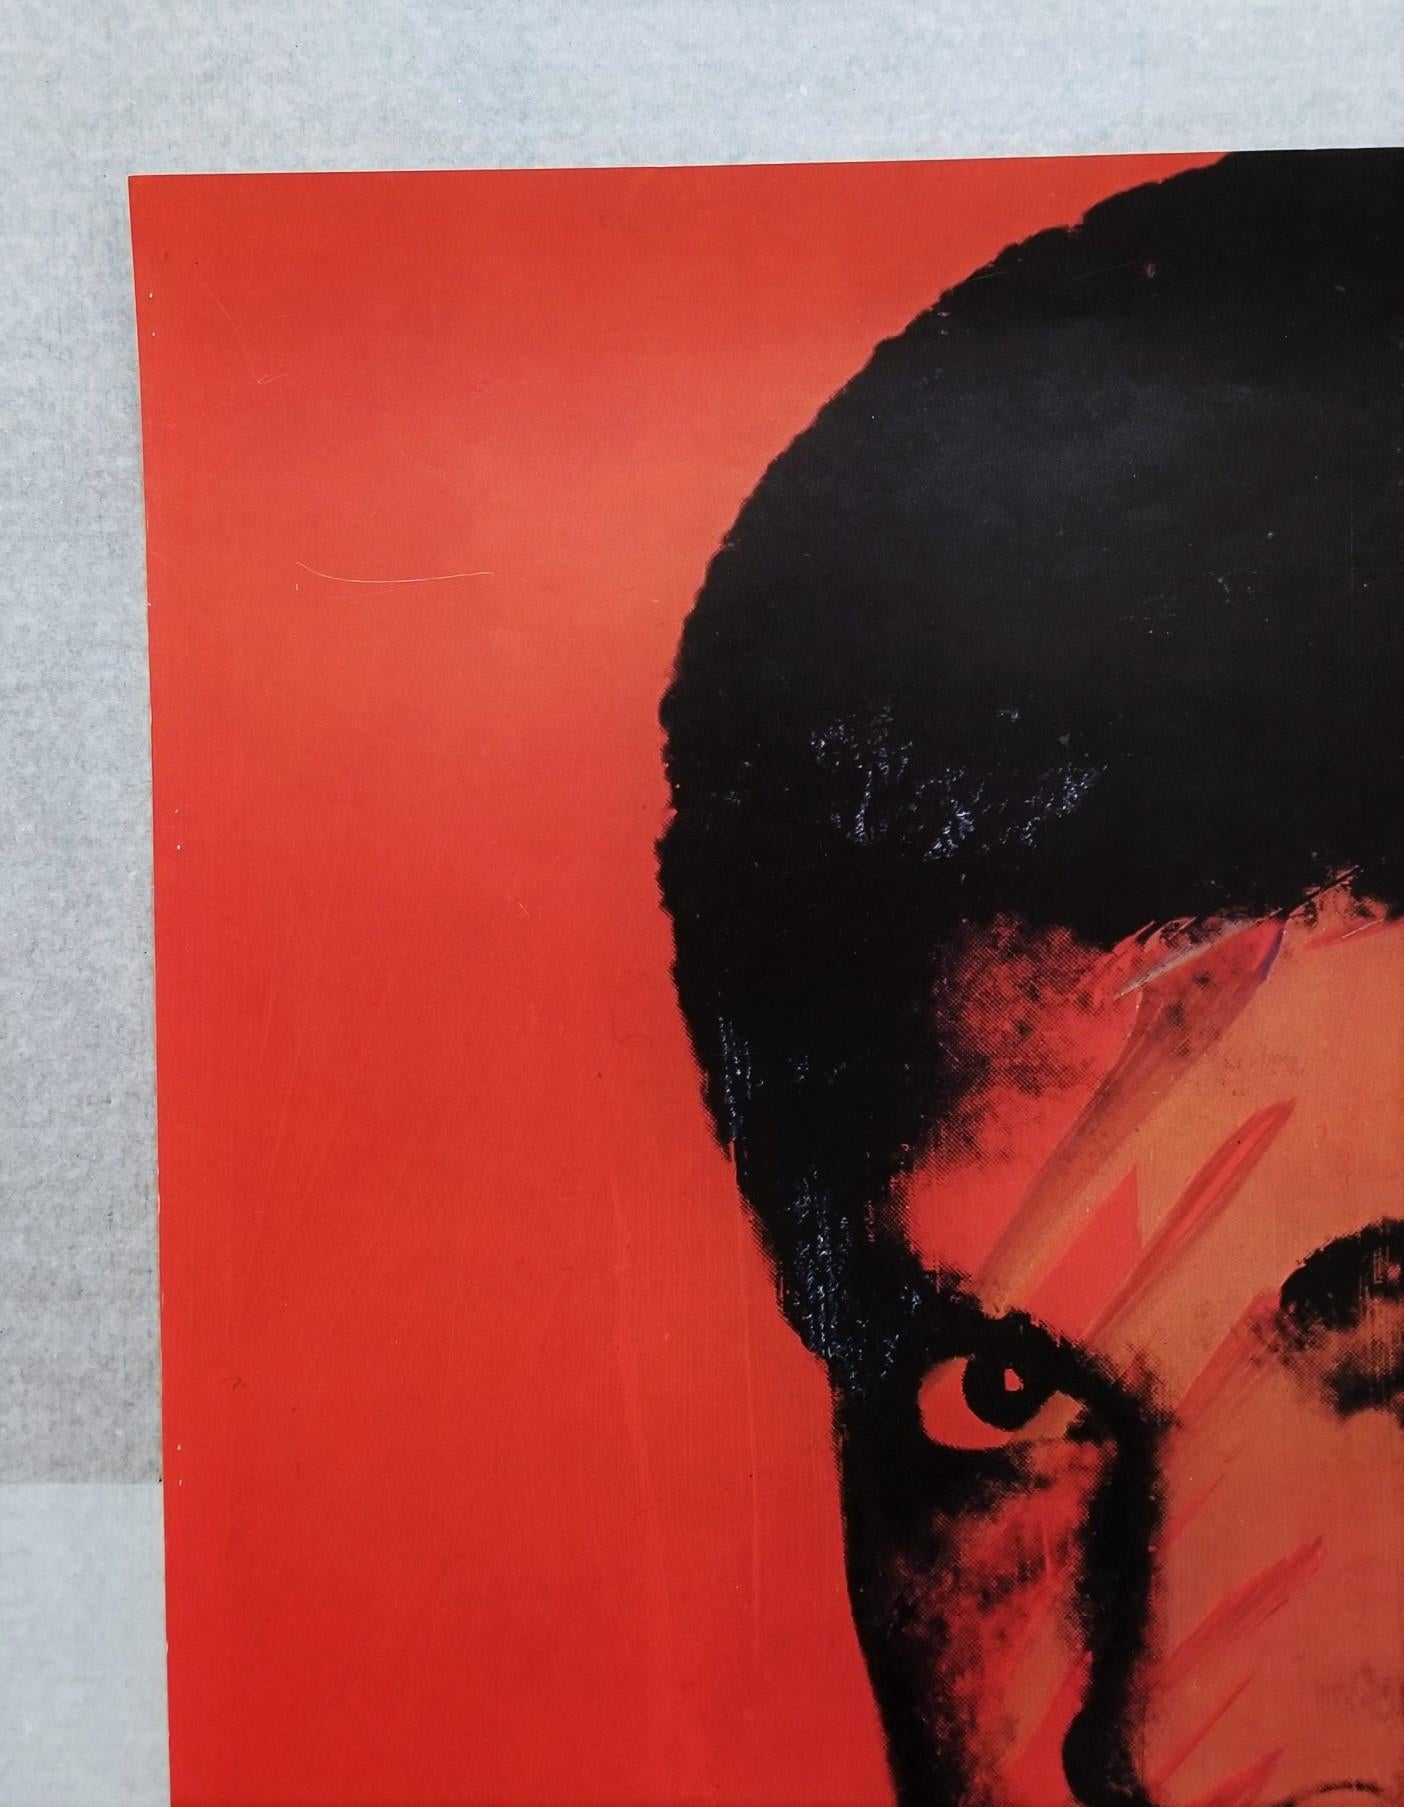 An original signed offset-lithograph, poster on smooth wove paper after American artist Andy Warhol (1928-1987) titled 